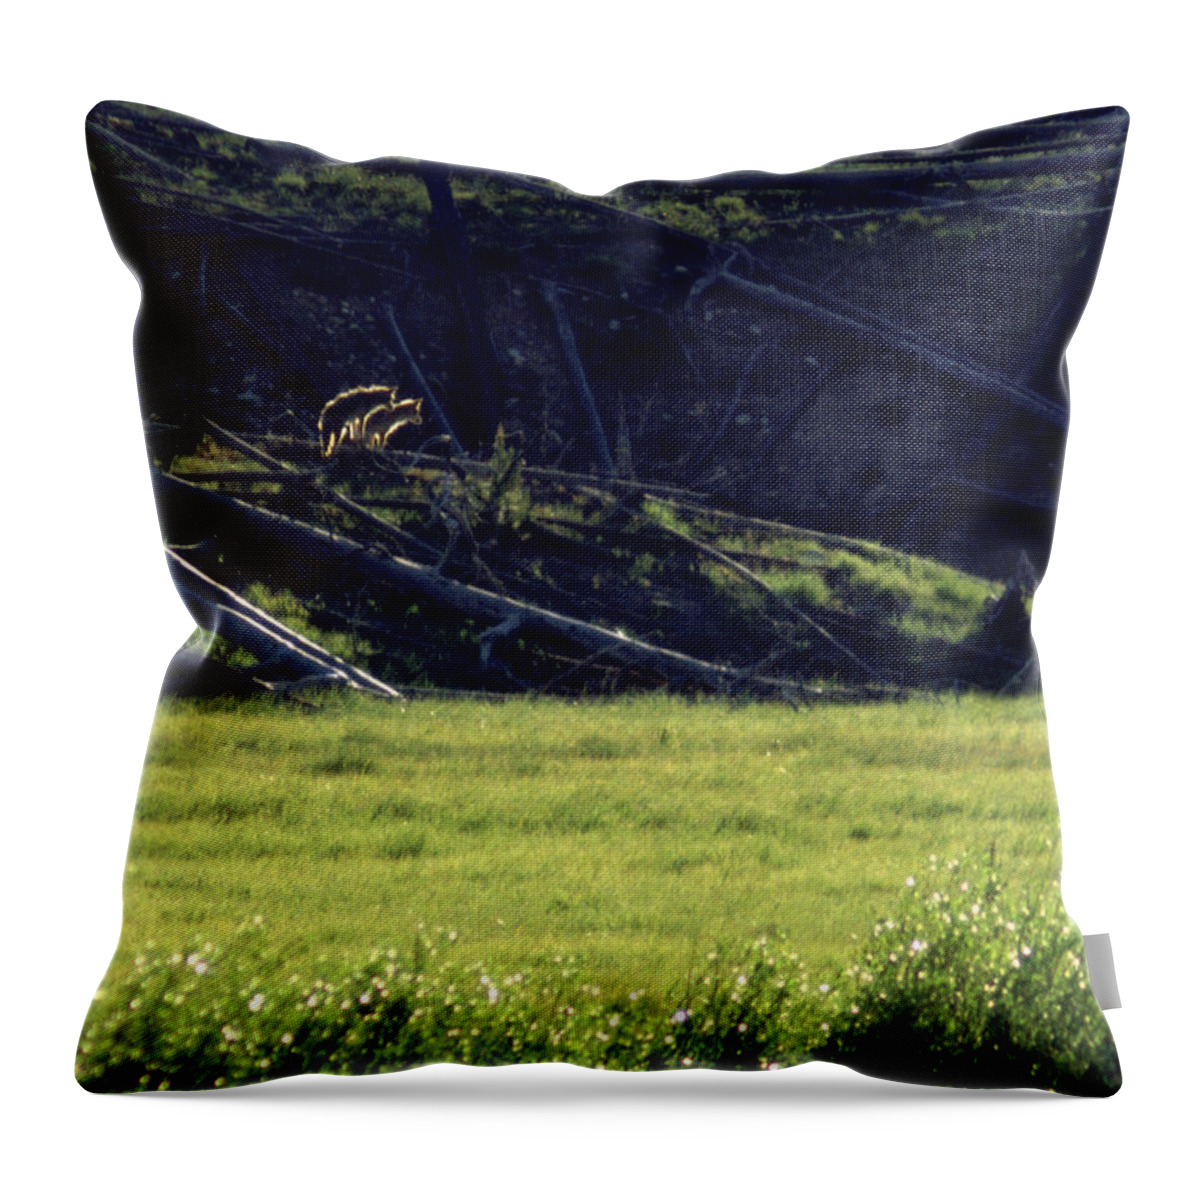 Backlit Throw Pillow featuring the photograph Backlit Coyotes by Ted Keller